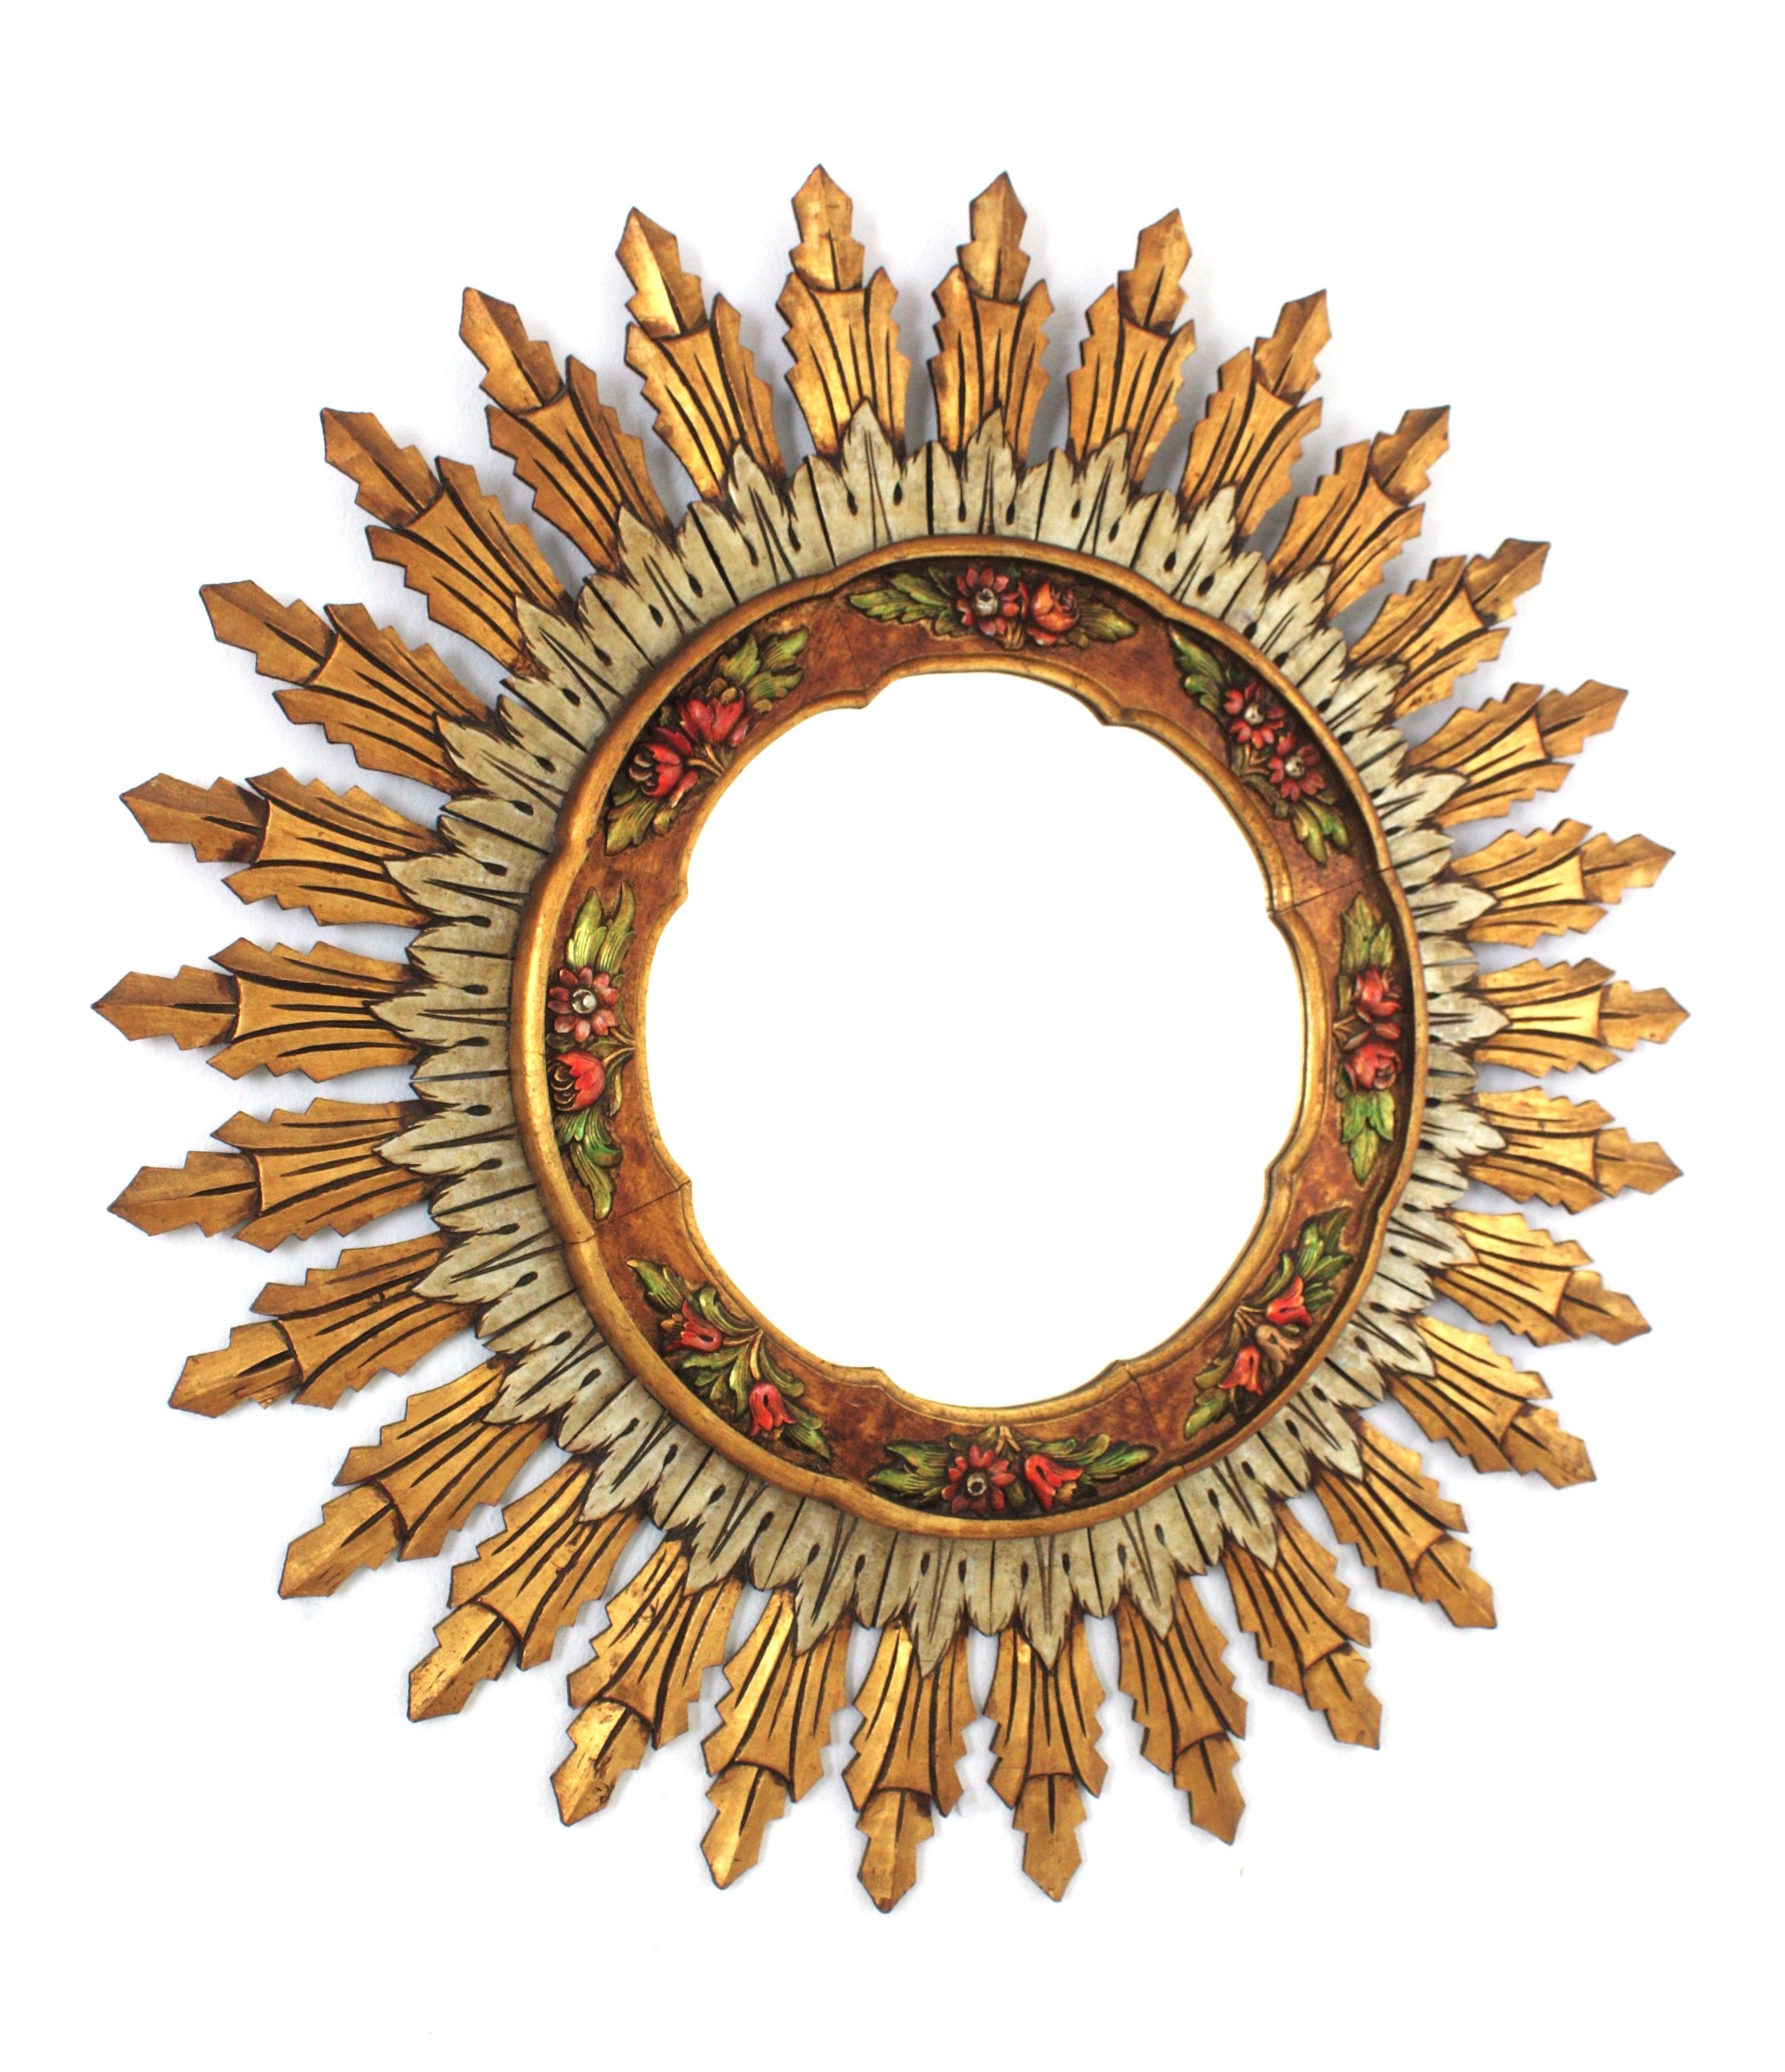 Spanish Carved Gilt and Silvered Wood Sunburst Mirror
Double Layered Giltwood Sunburst Mirror with Carved Polychrome Floral Details. Spain, 1960s.
This wall mirror features a layer of long rays at the back part and a layer of silvered shorter ones